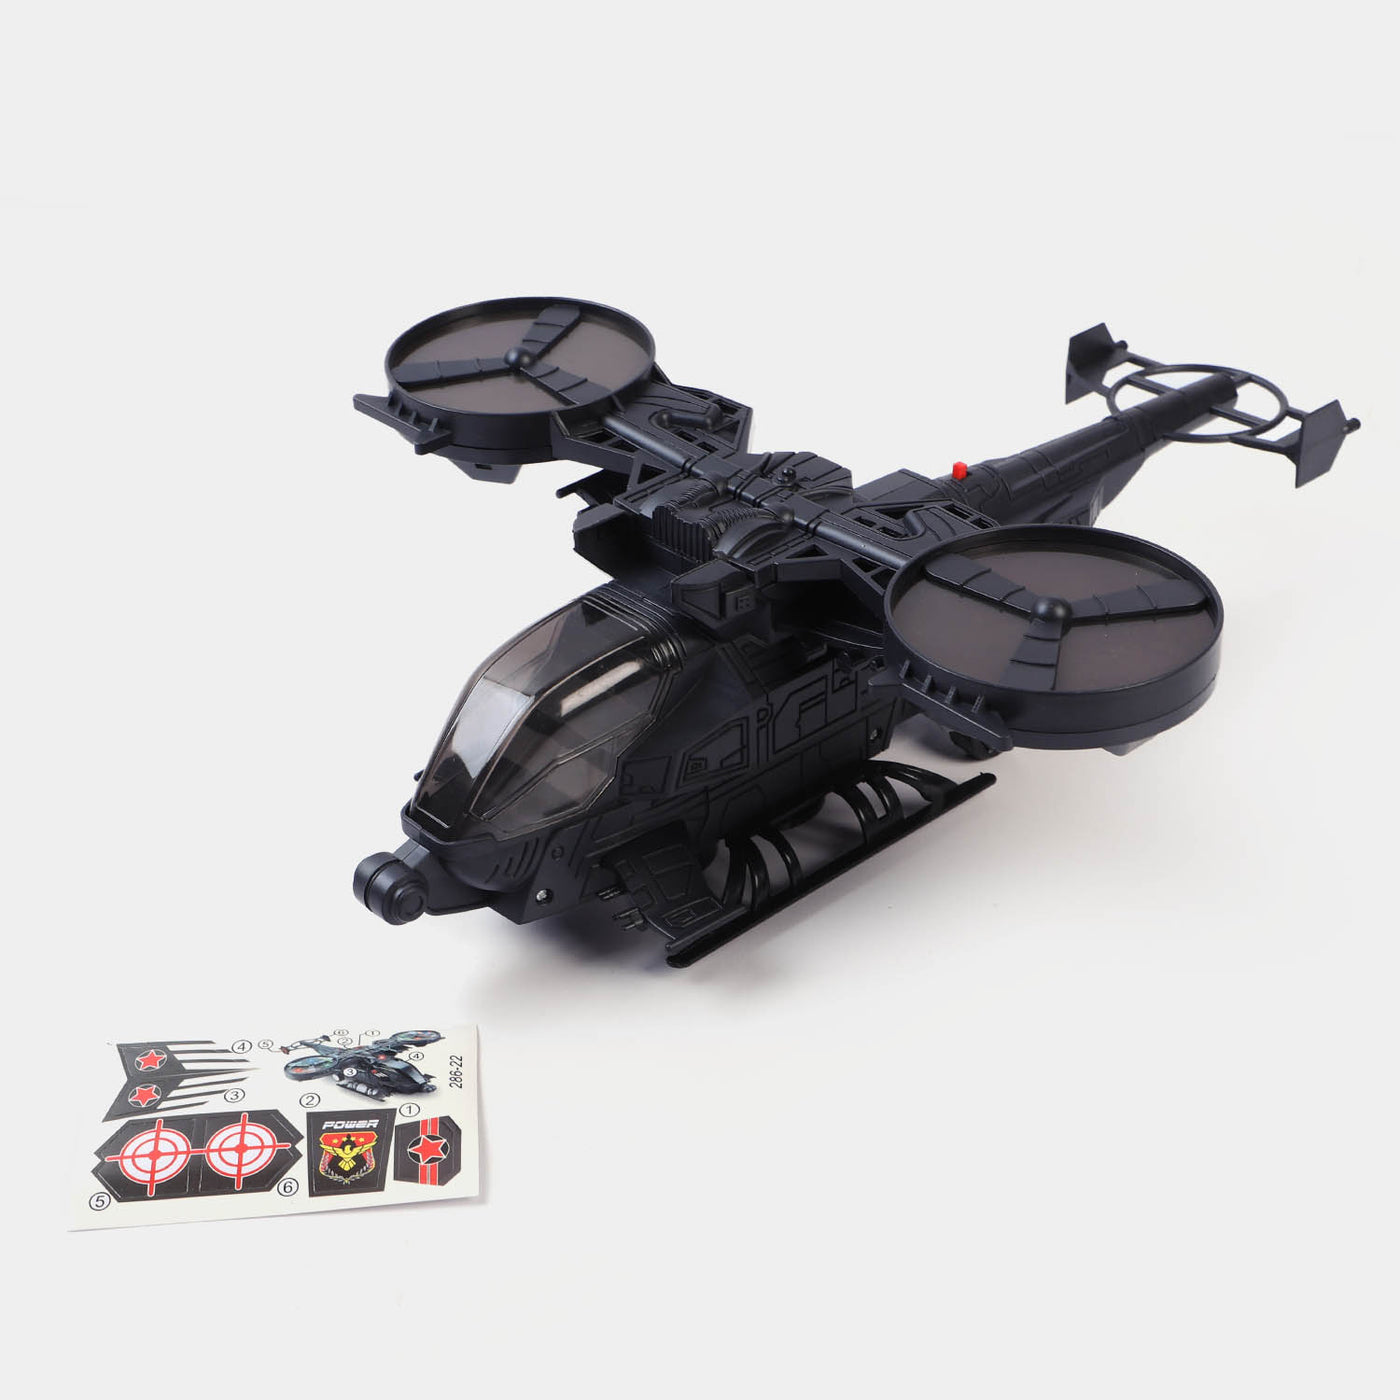 Super Military Armed Helicopter Toy